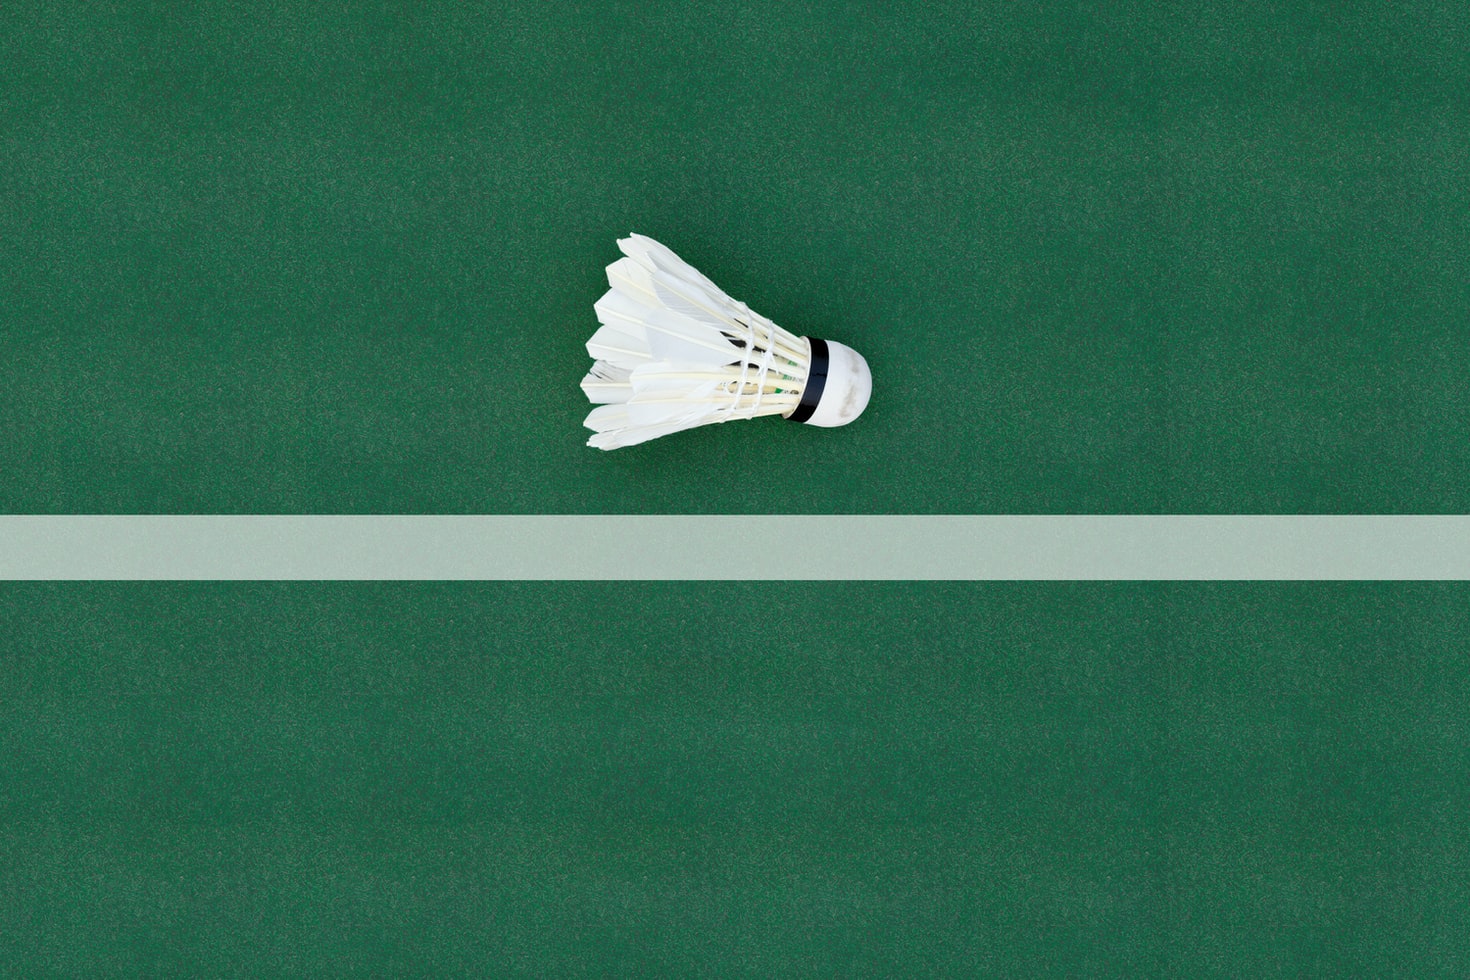 The Basic Rules of Badminton: A Complete Guide